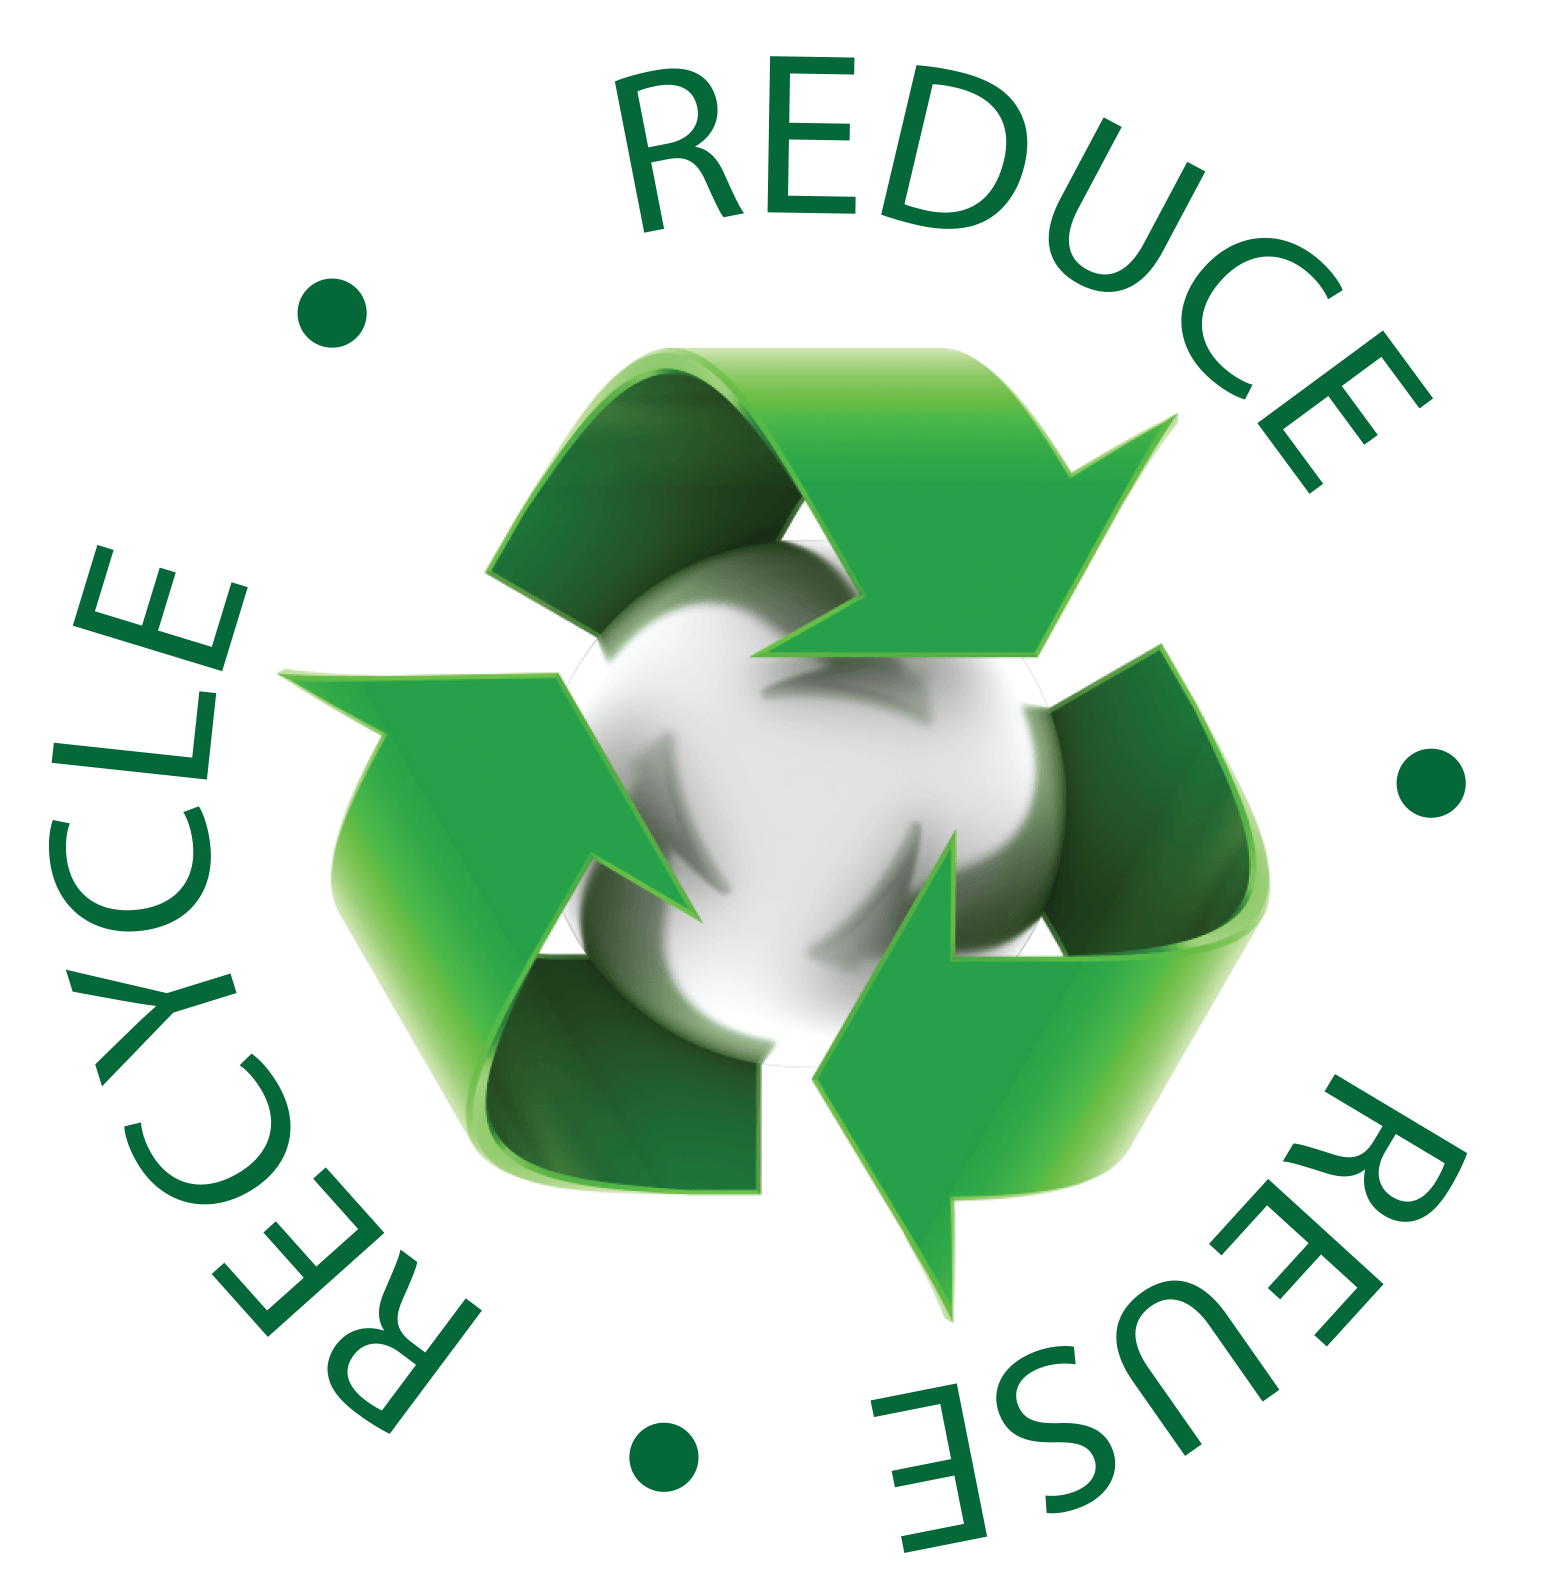 Reuse Logo - Reduce Reuse Recycle Logo. Free All Download. Recycle logo